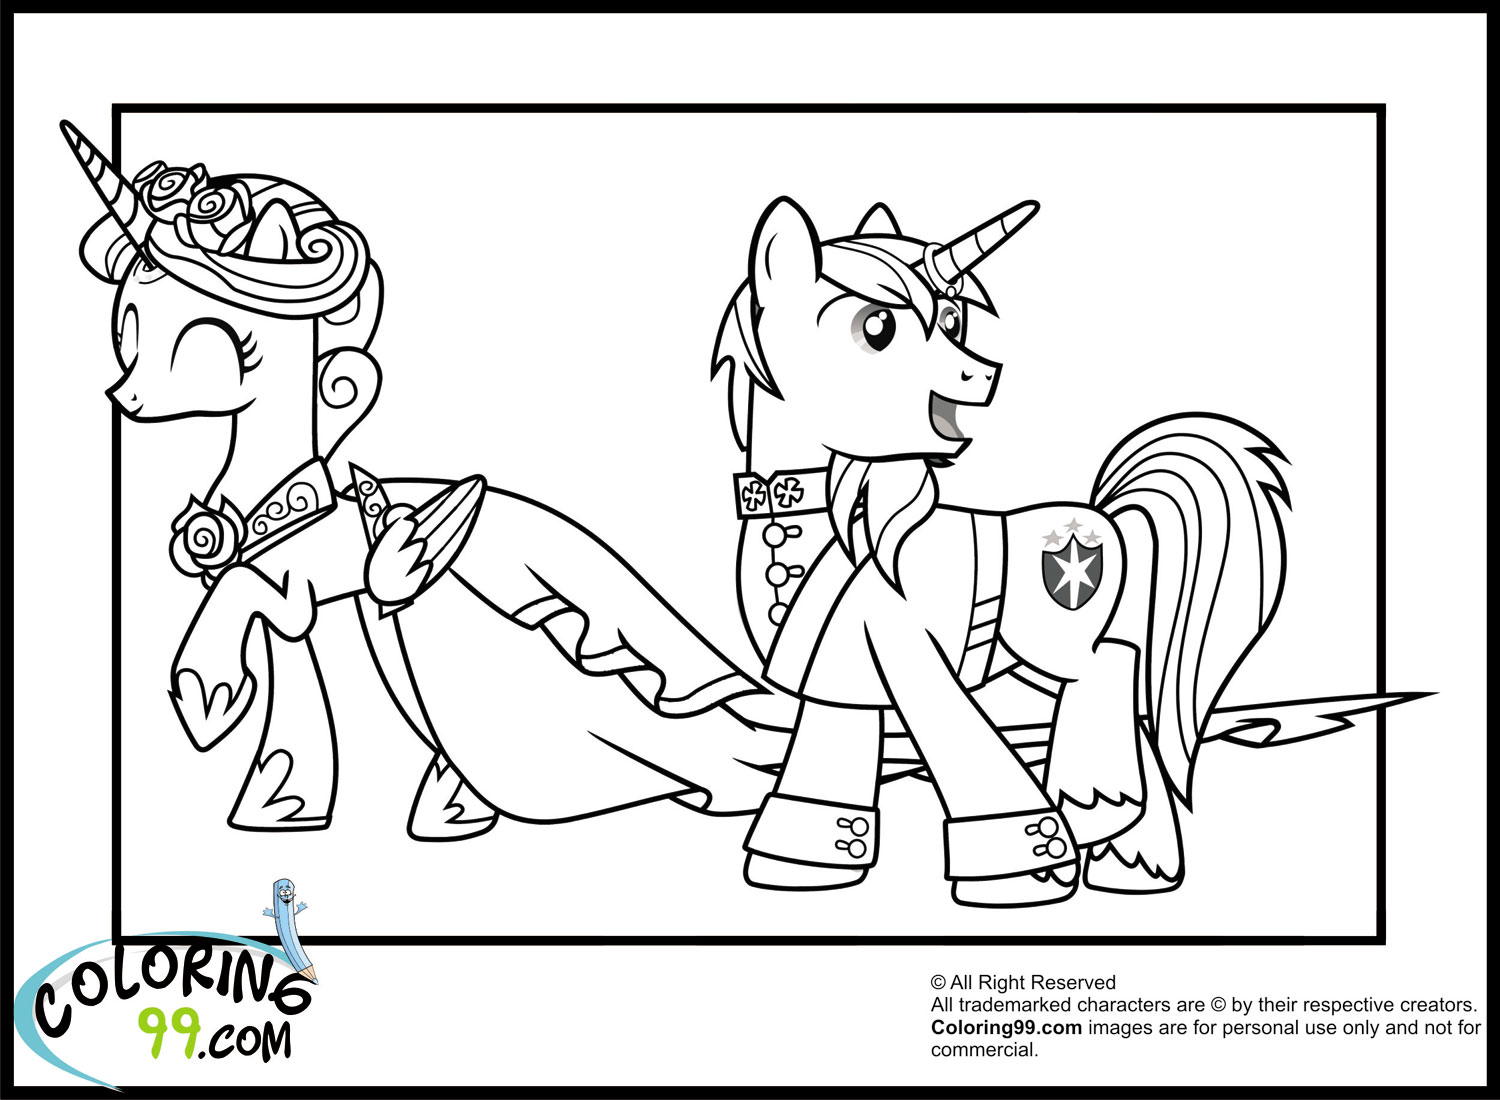 Shining armor coloring pages team colors